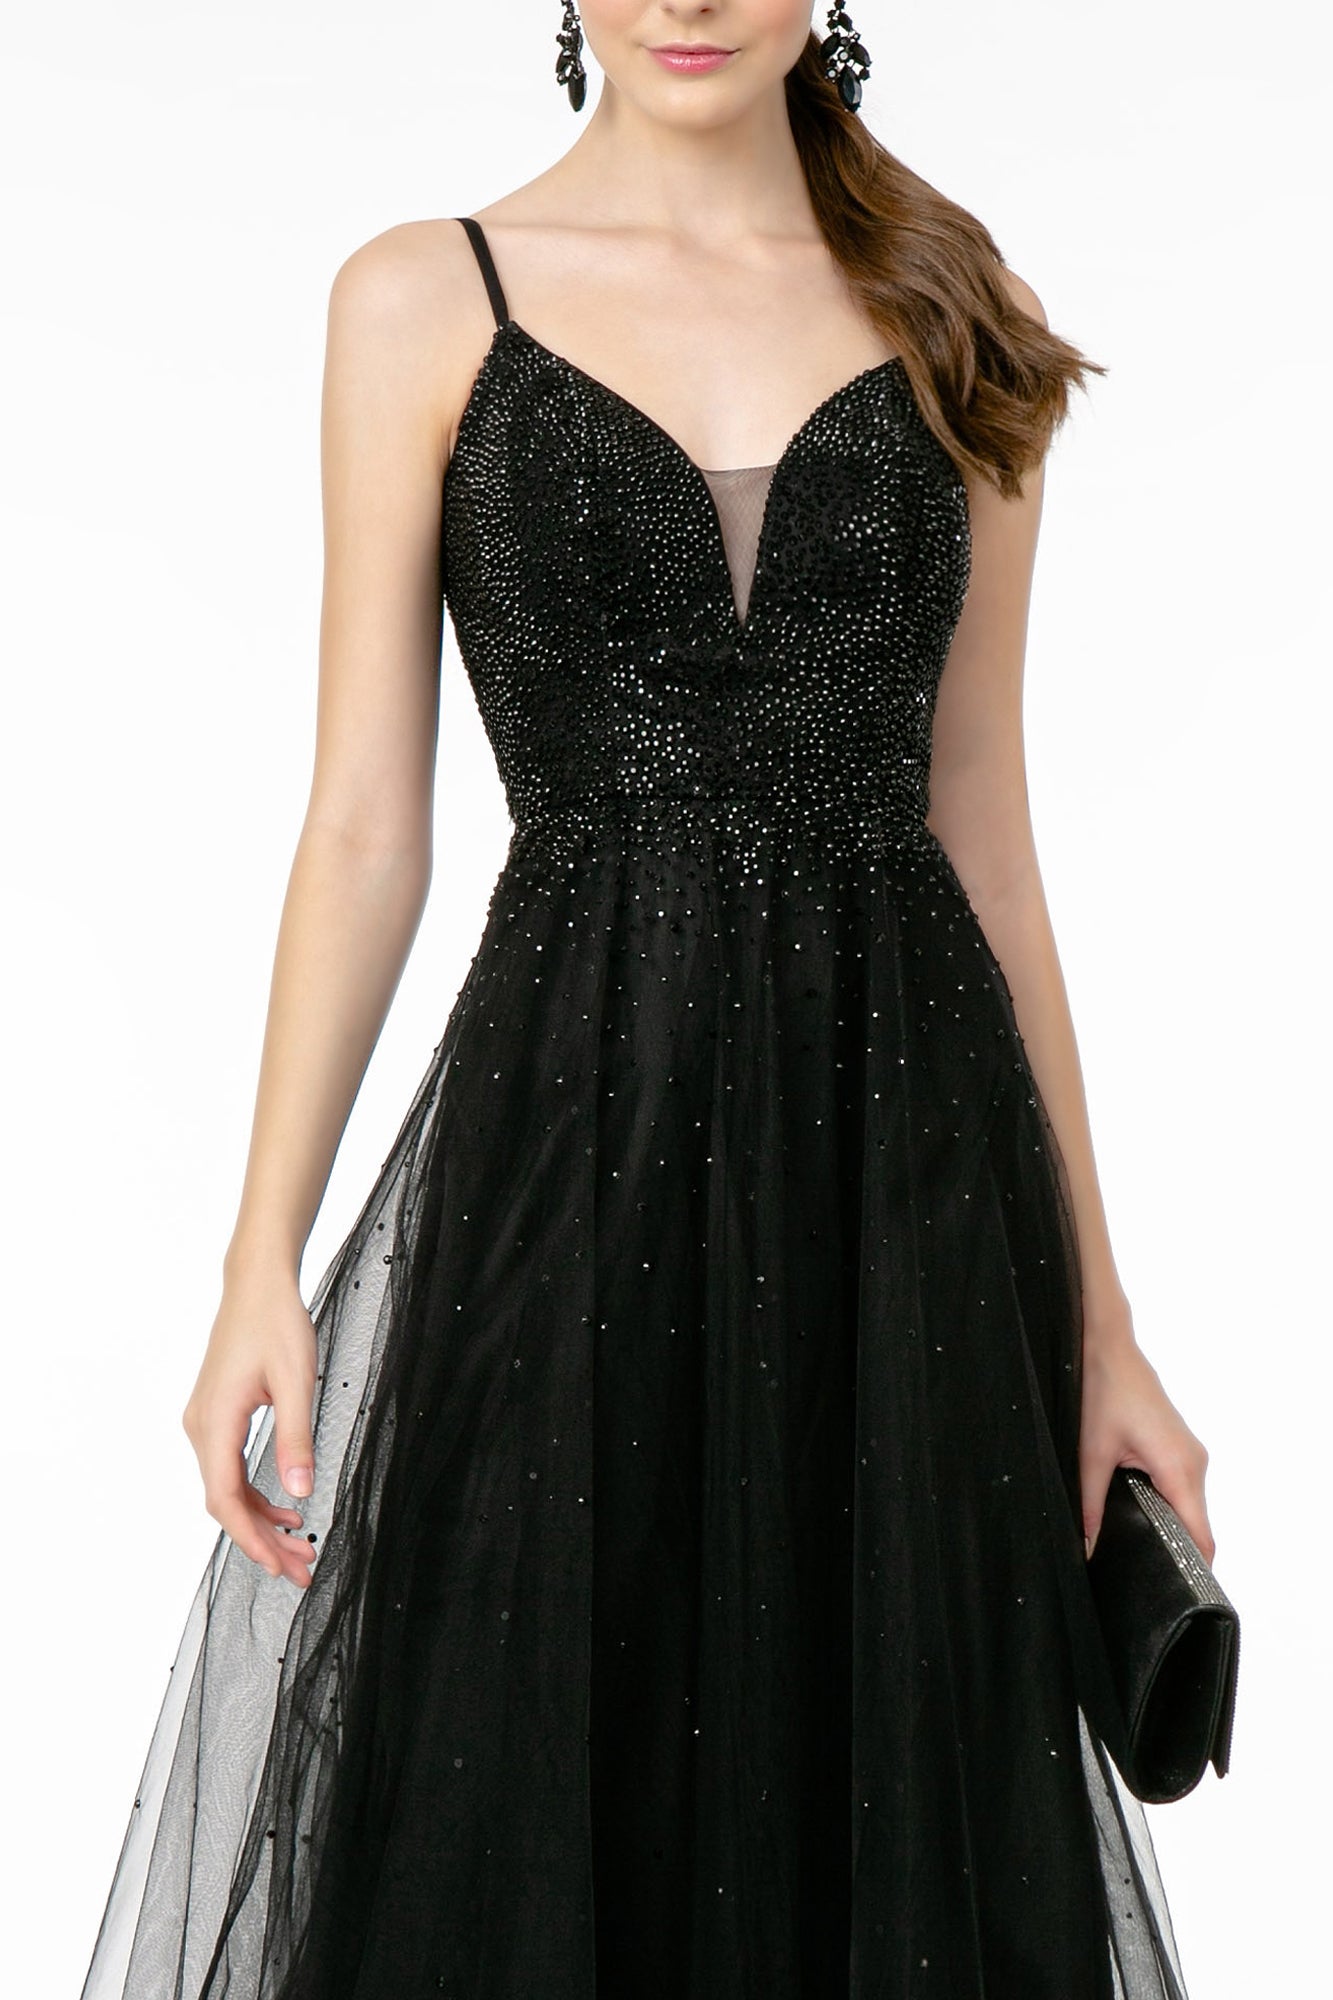 Tallulah Silk Charmeuse Gown in Black